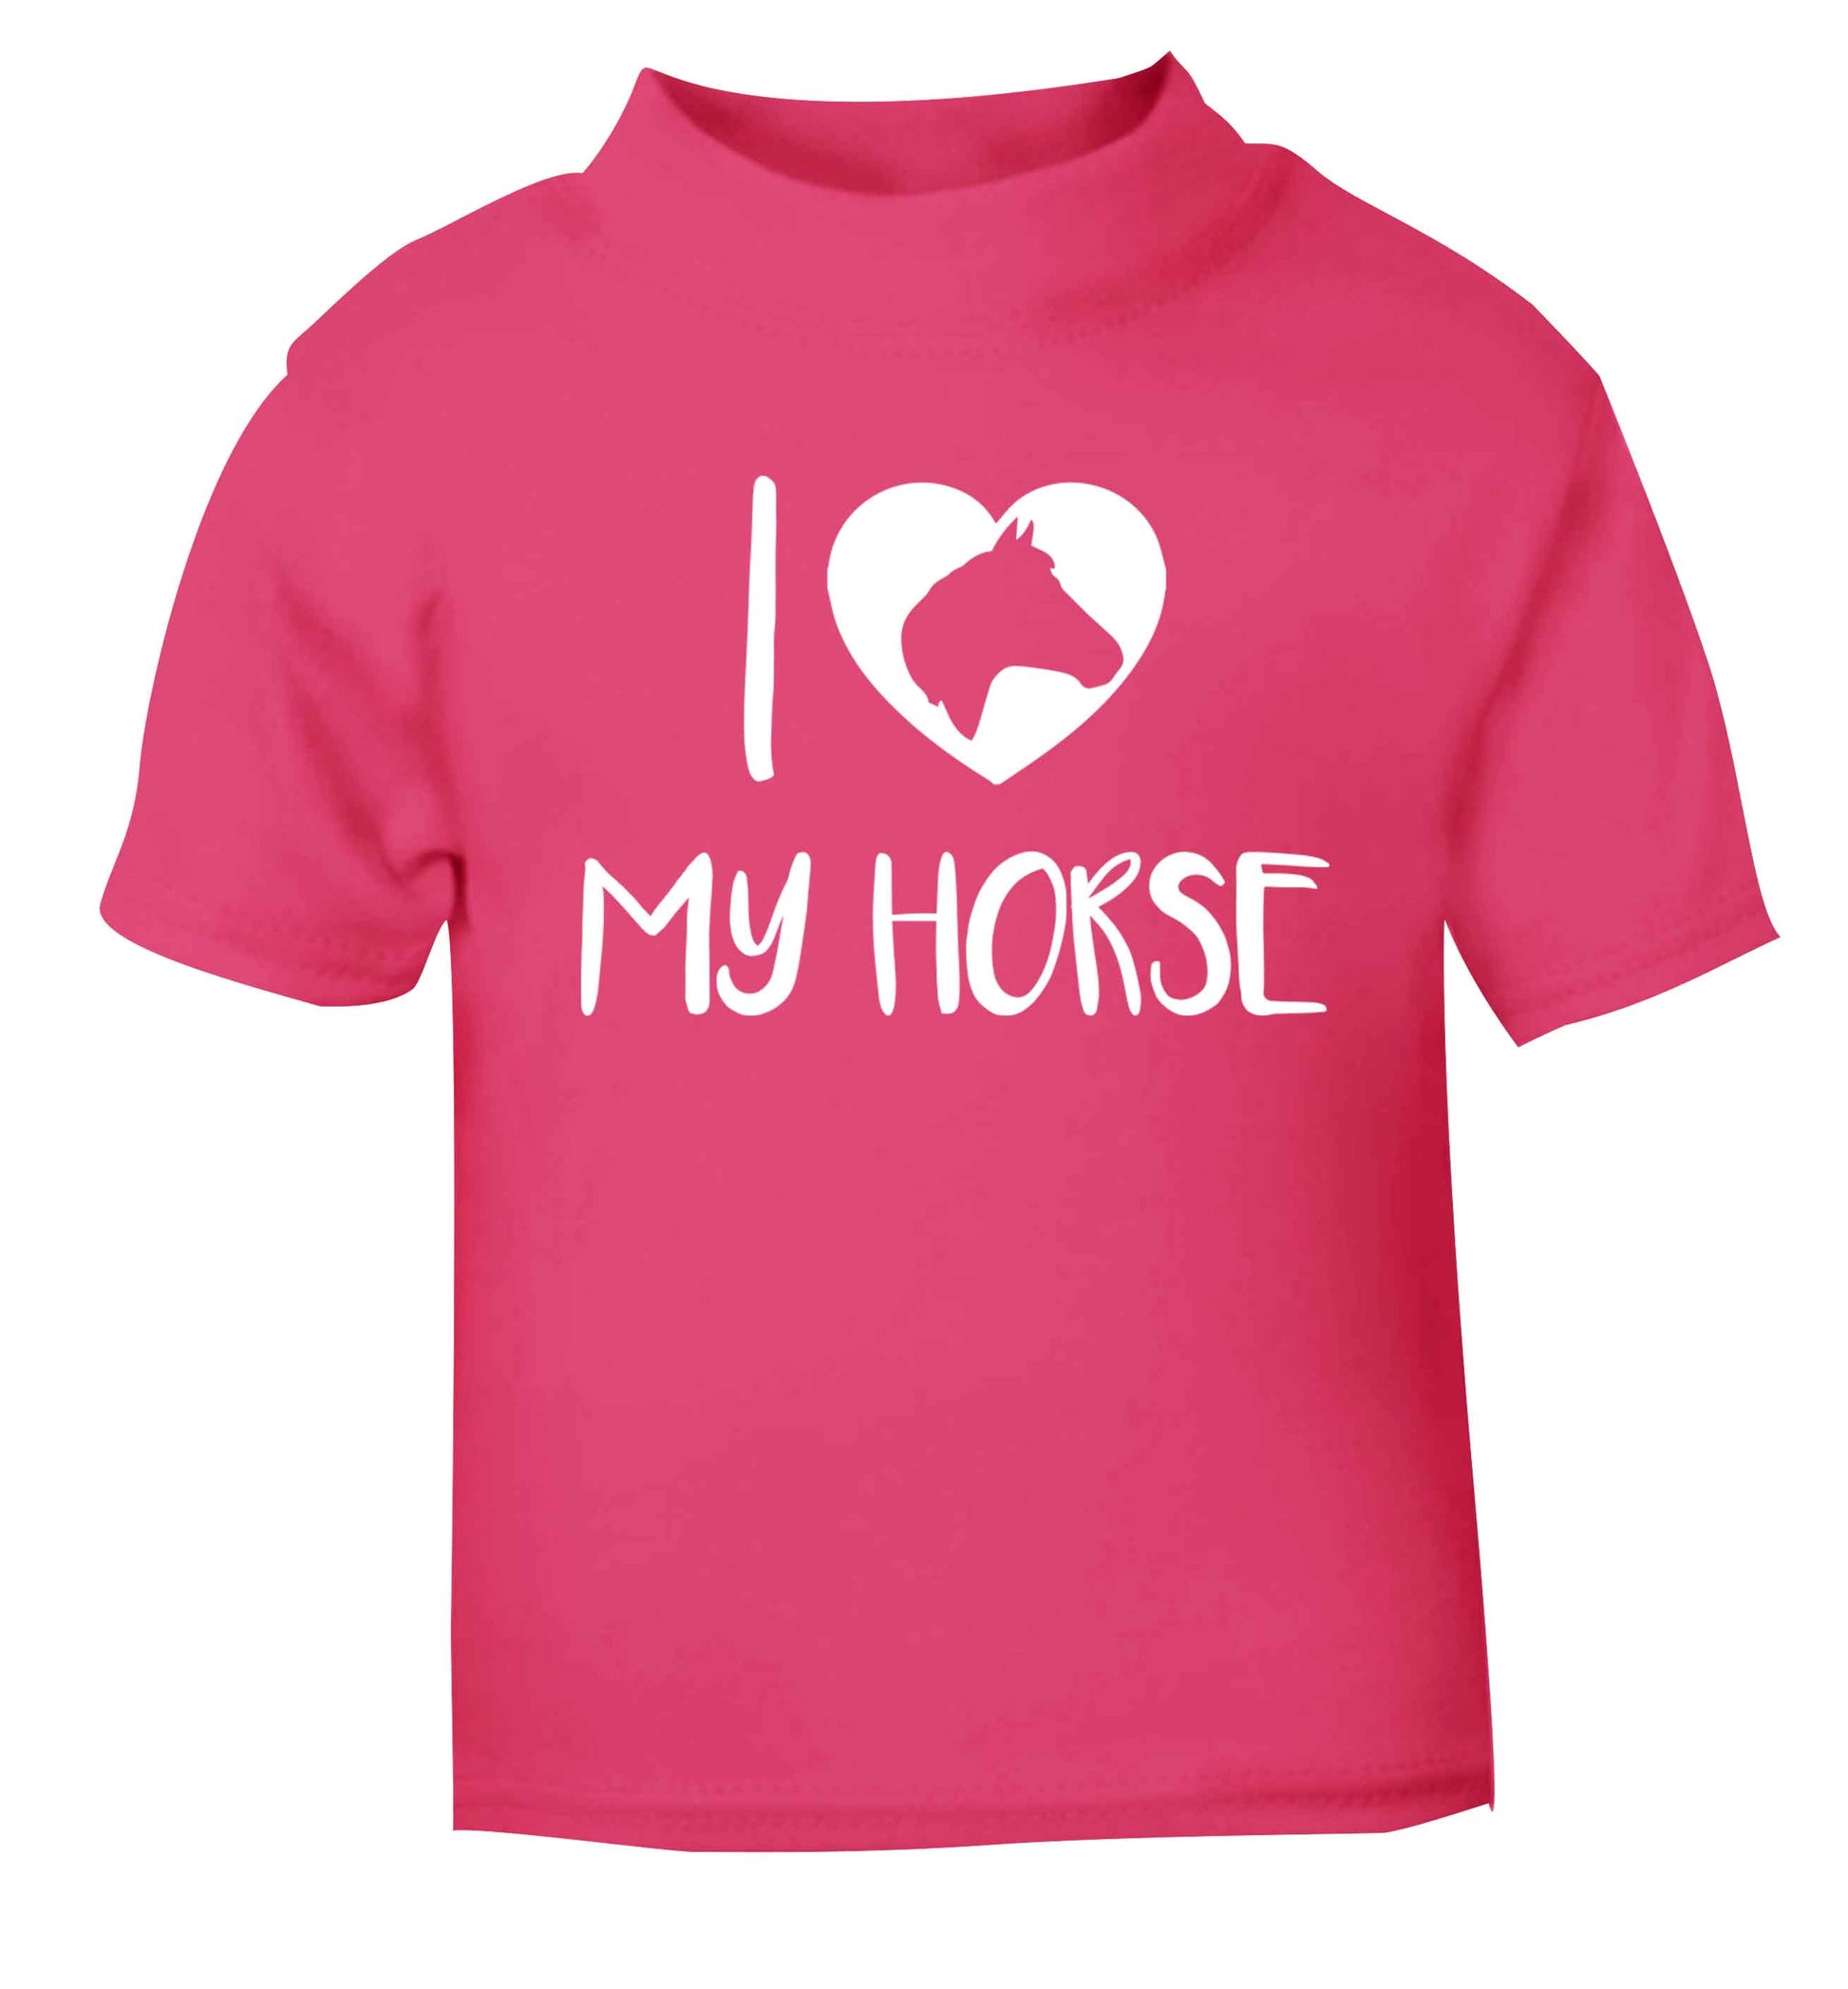 I love my horse pink baby toddler Tshirt 2 Years